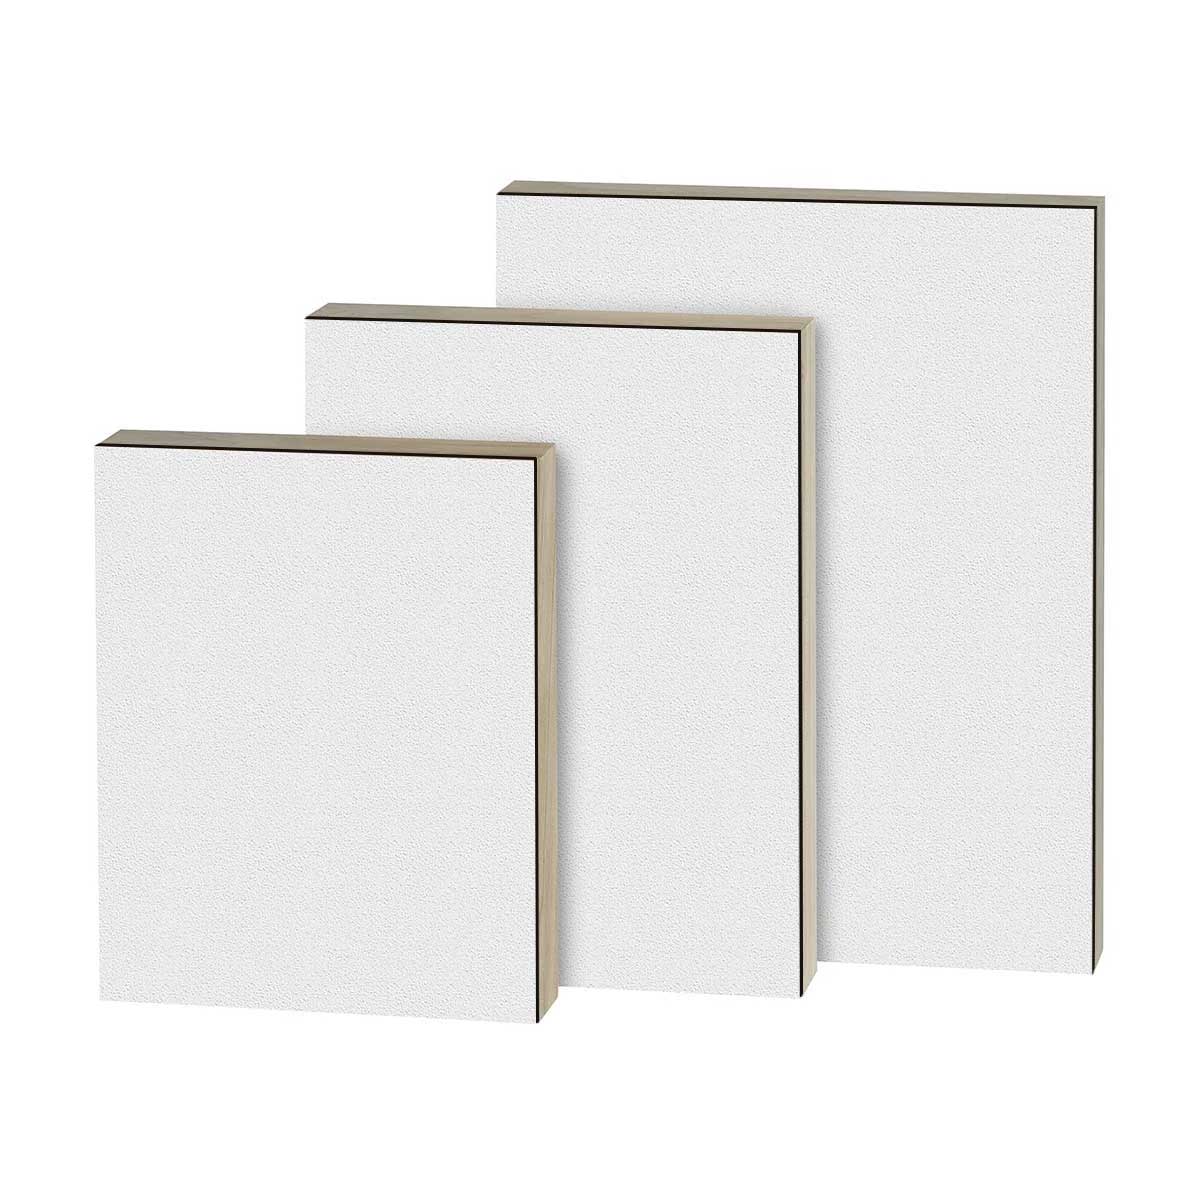 Gesso Primed Cradled Hardboard Panel Wooden Canvas - 7/8" Thick Traditional Profile for Oil and Acrylic Paint Trekell Art Supplies